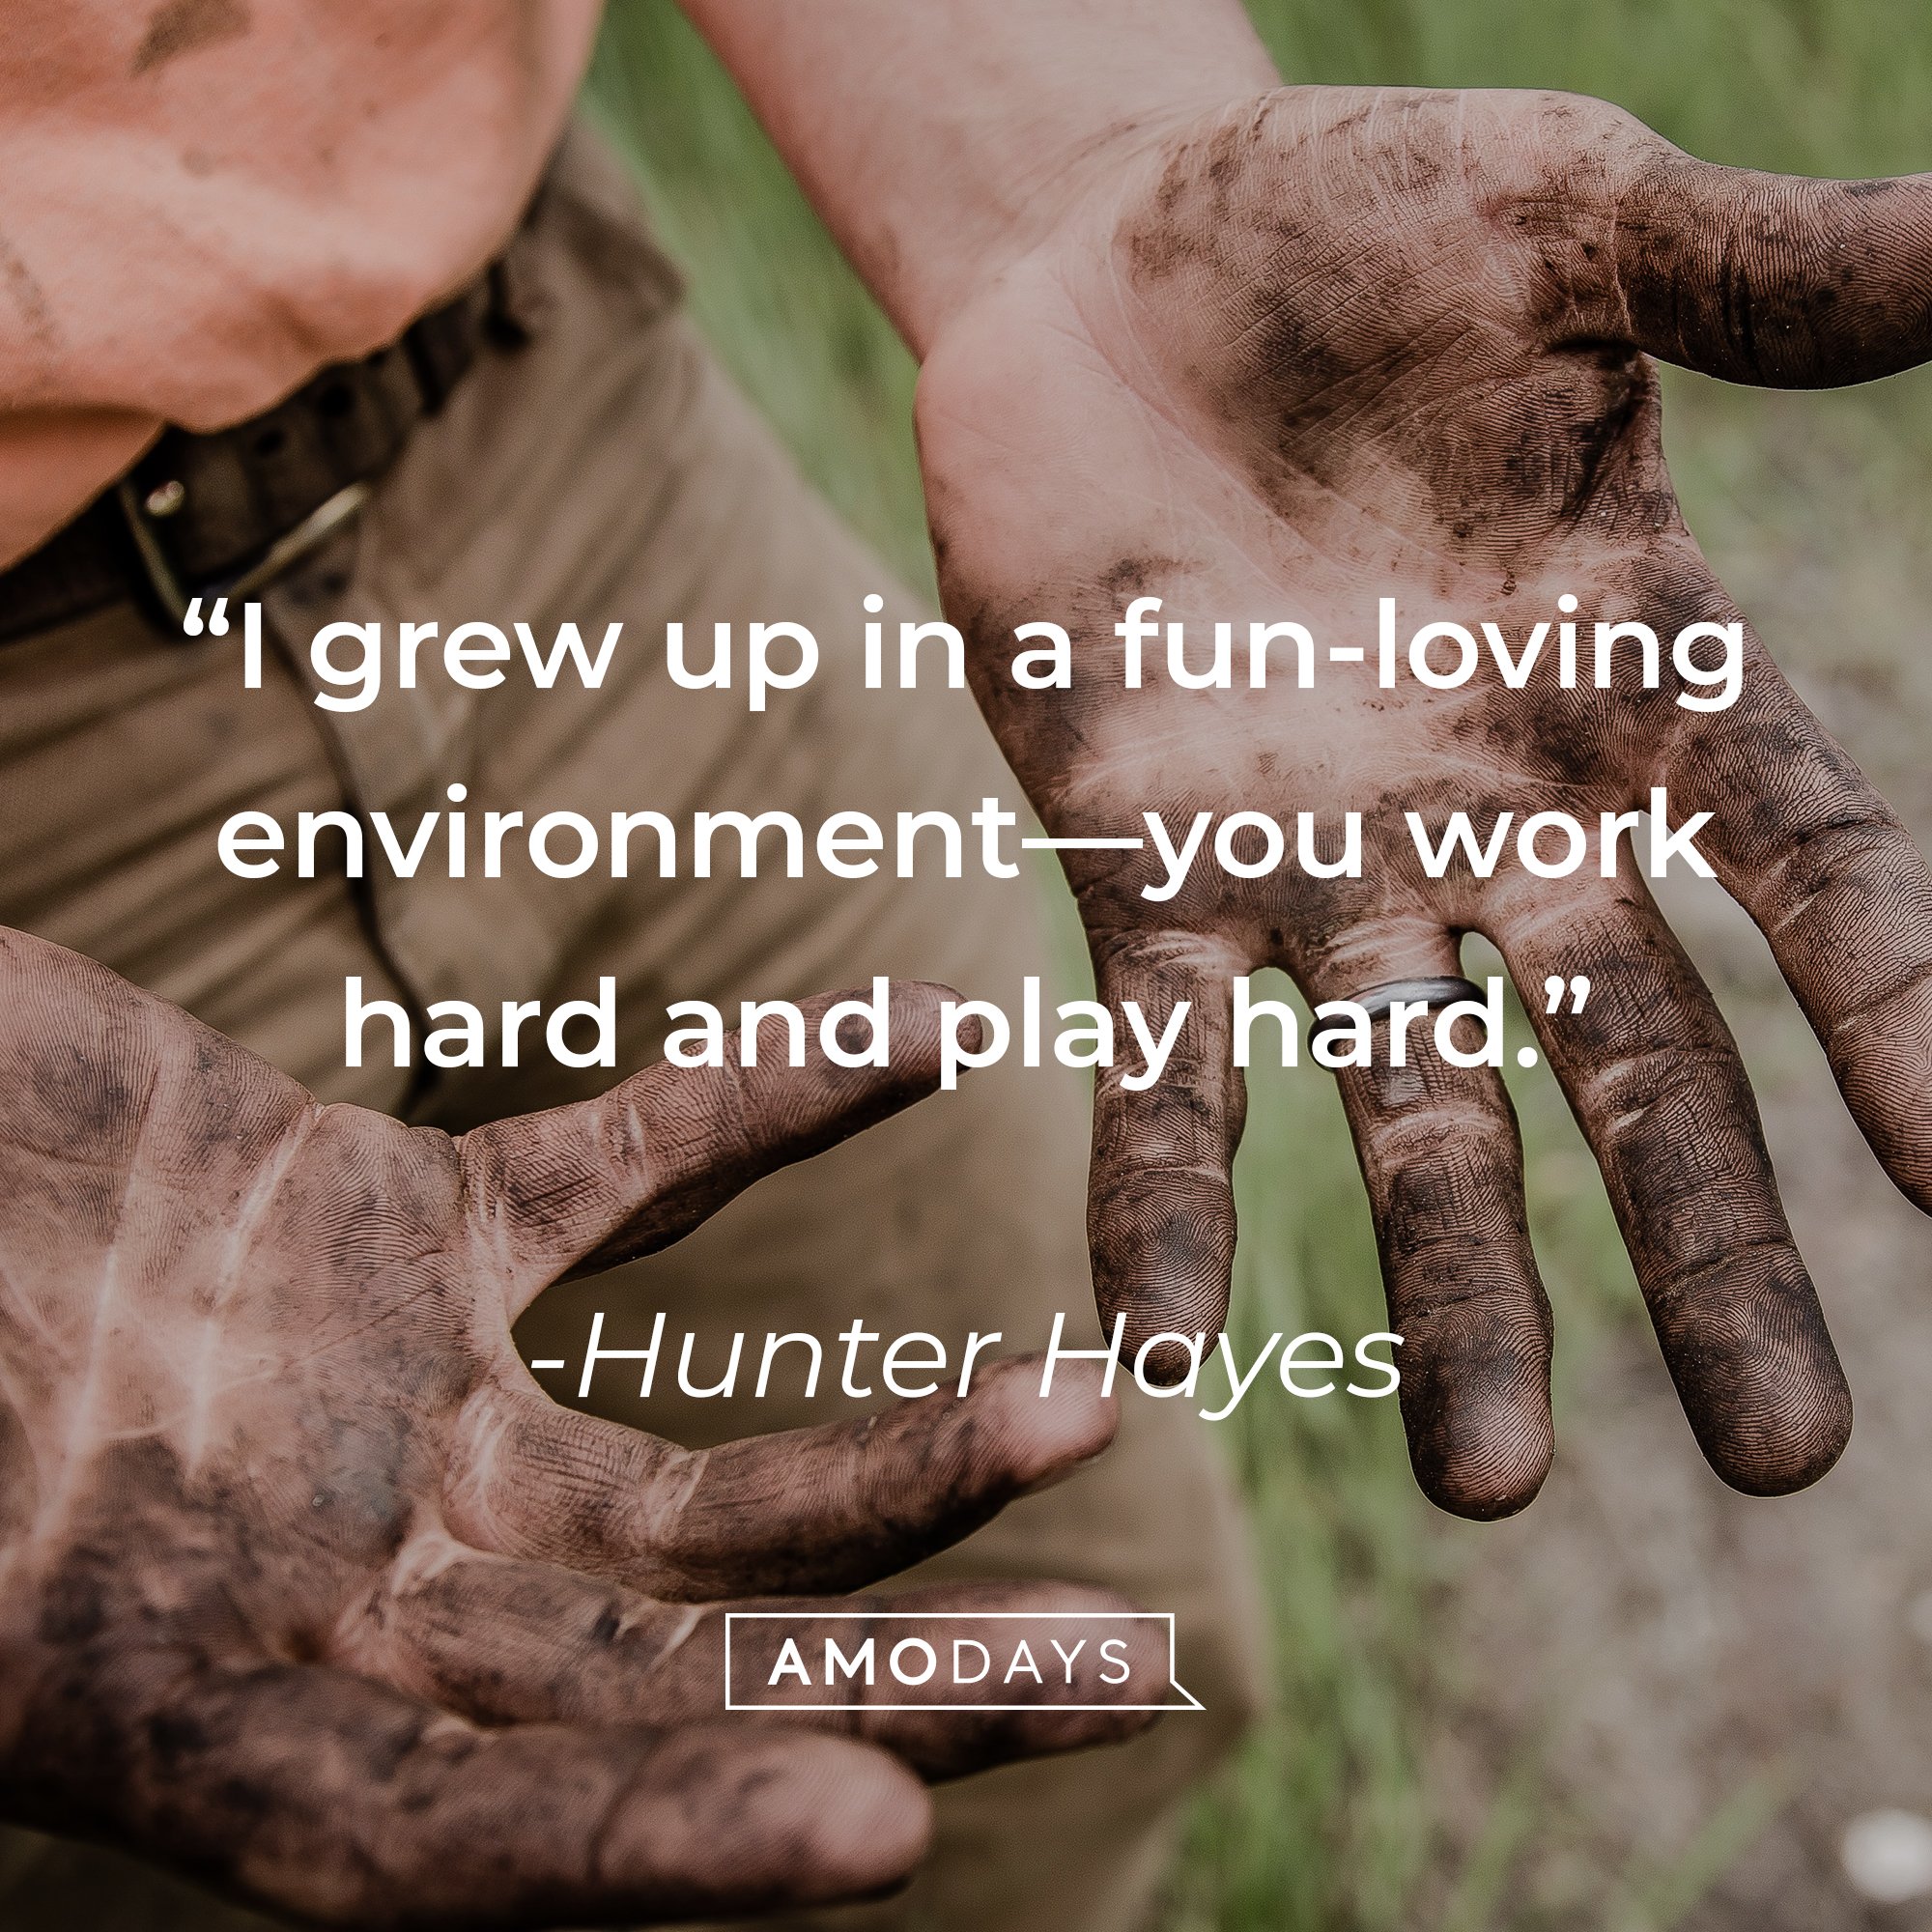 Hunter Hayes' quote: "I grew up in a fun-loving environment—you work hard and play hard." | Image: AmoDays